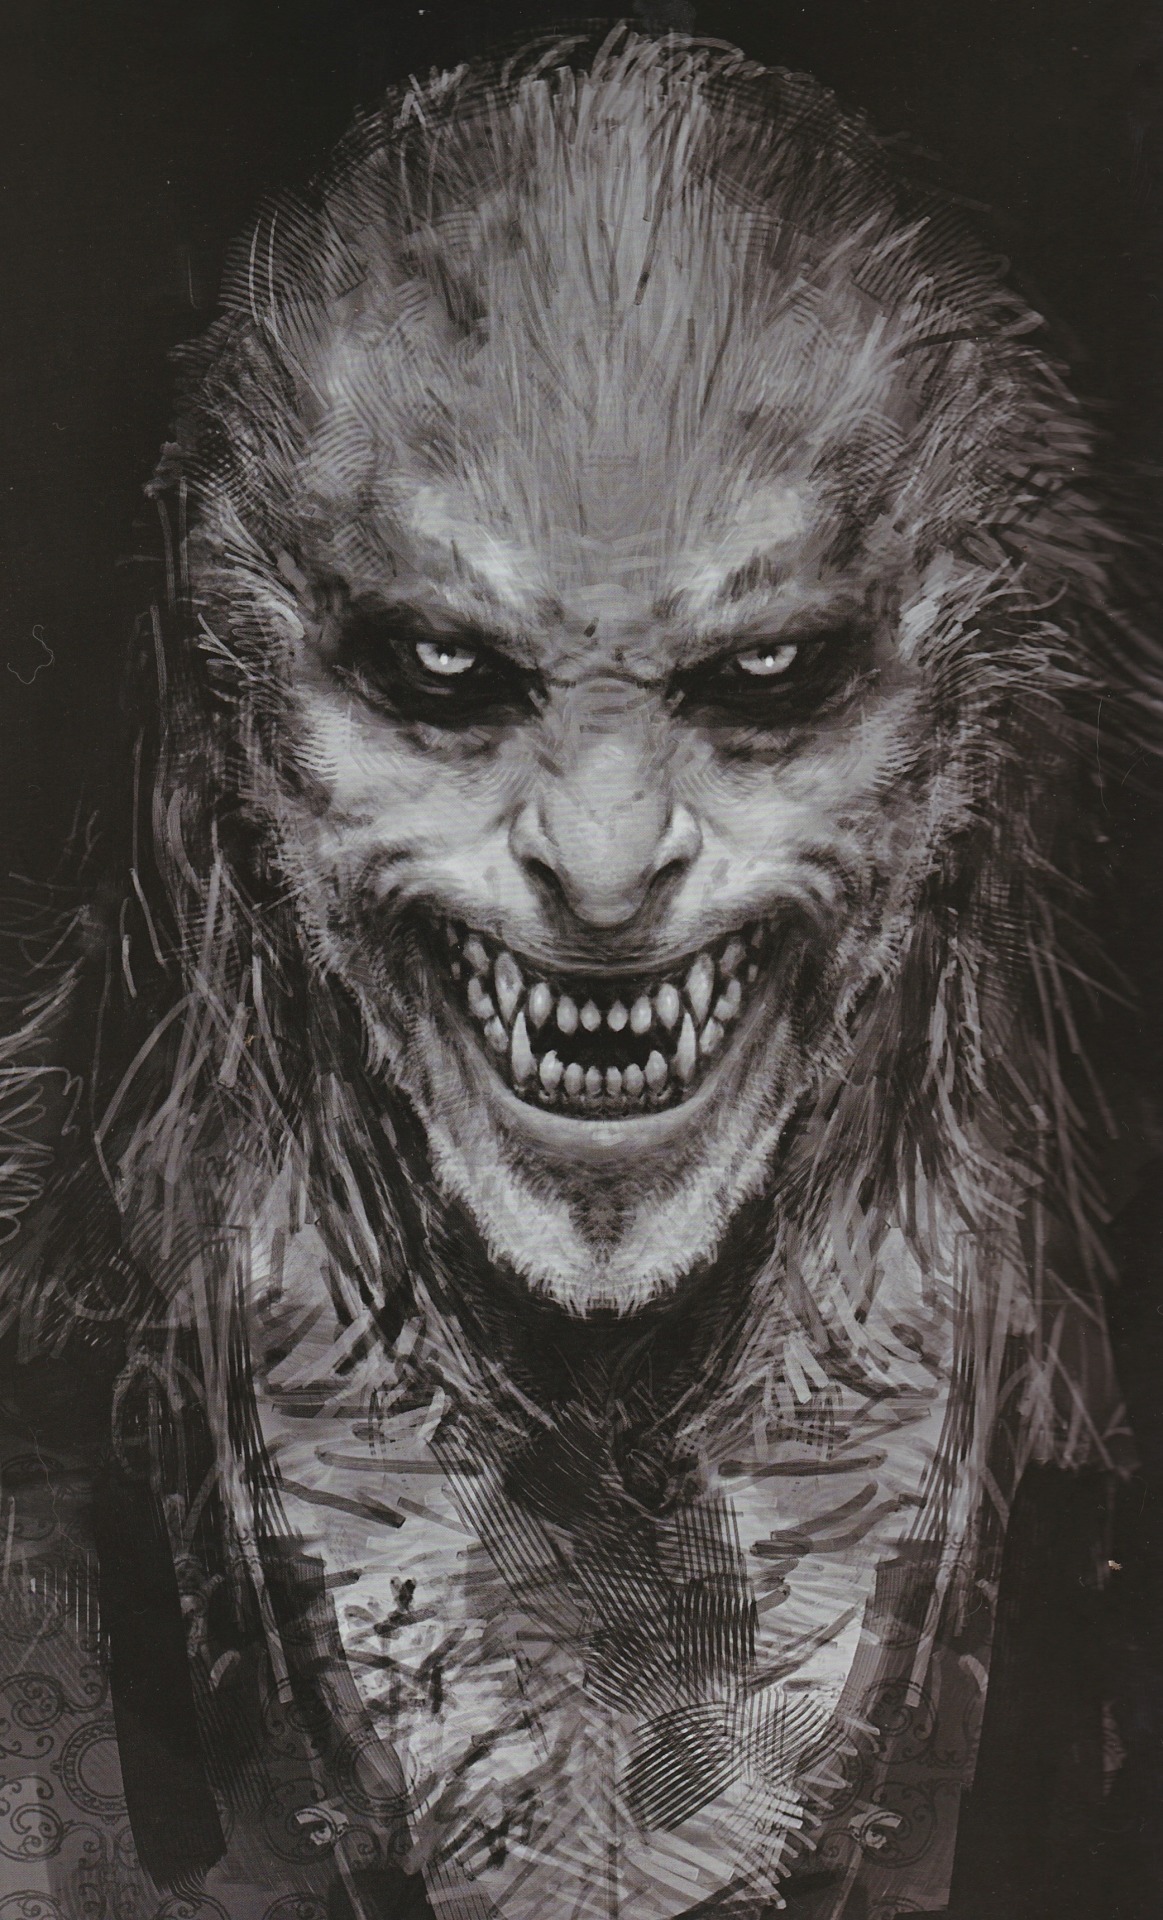 Parlez Vous Loup Garou Concept Art Of Fenrir Greyback By Rob Bliss For